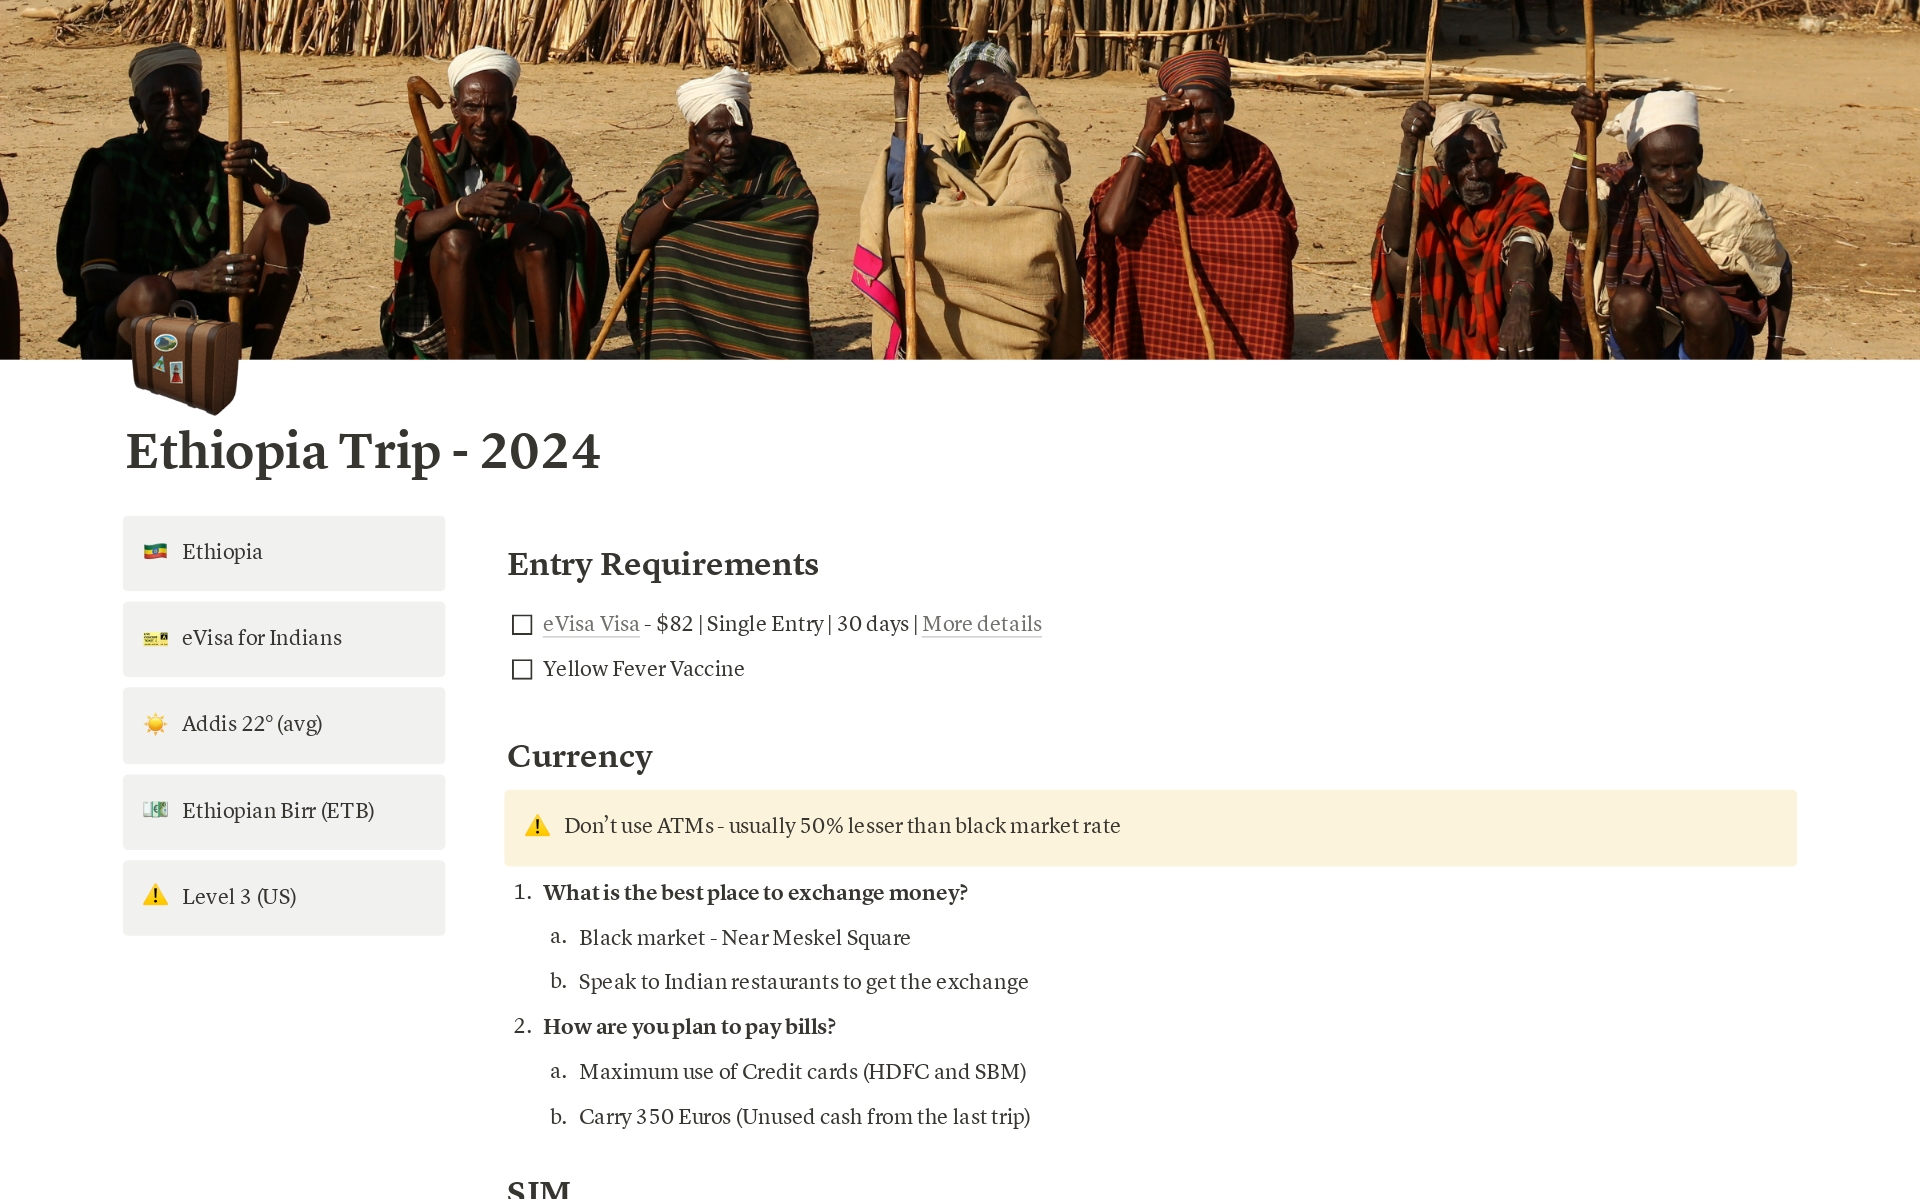 A simple yet effective travel planning notion template so you focus more on experience and excitement than planning.

Bonus: You get the idea about usage with Ethiopia travel planning content.